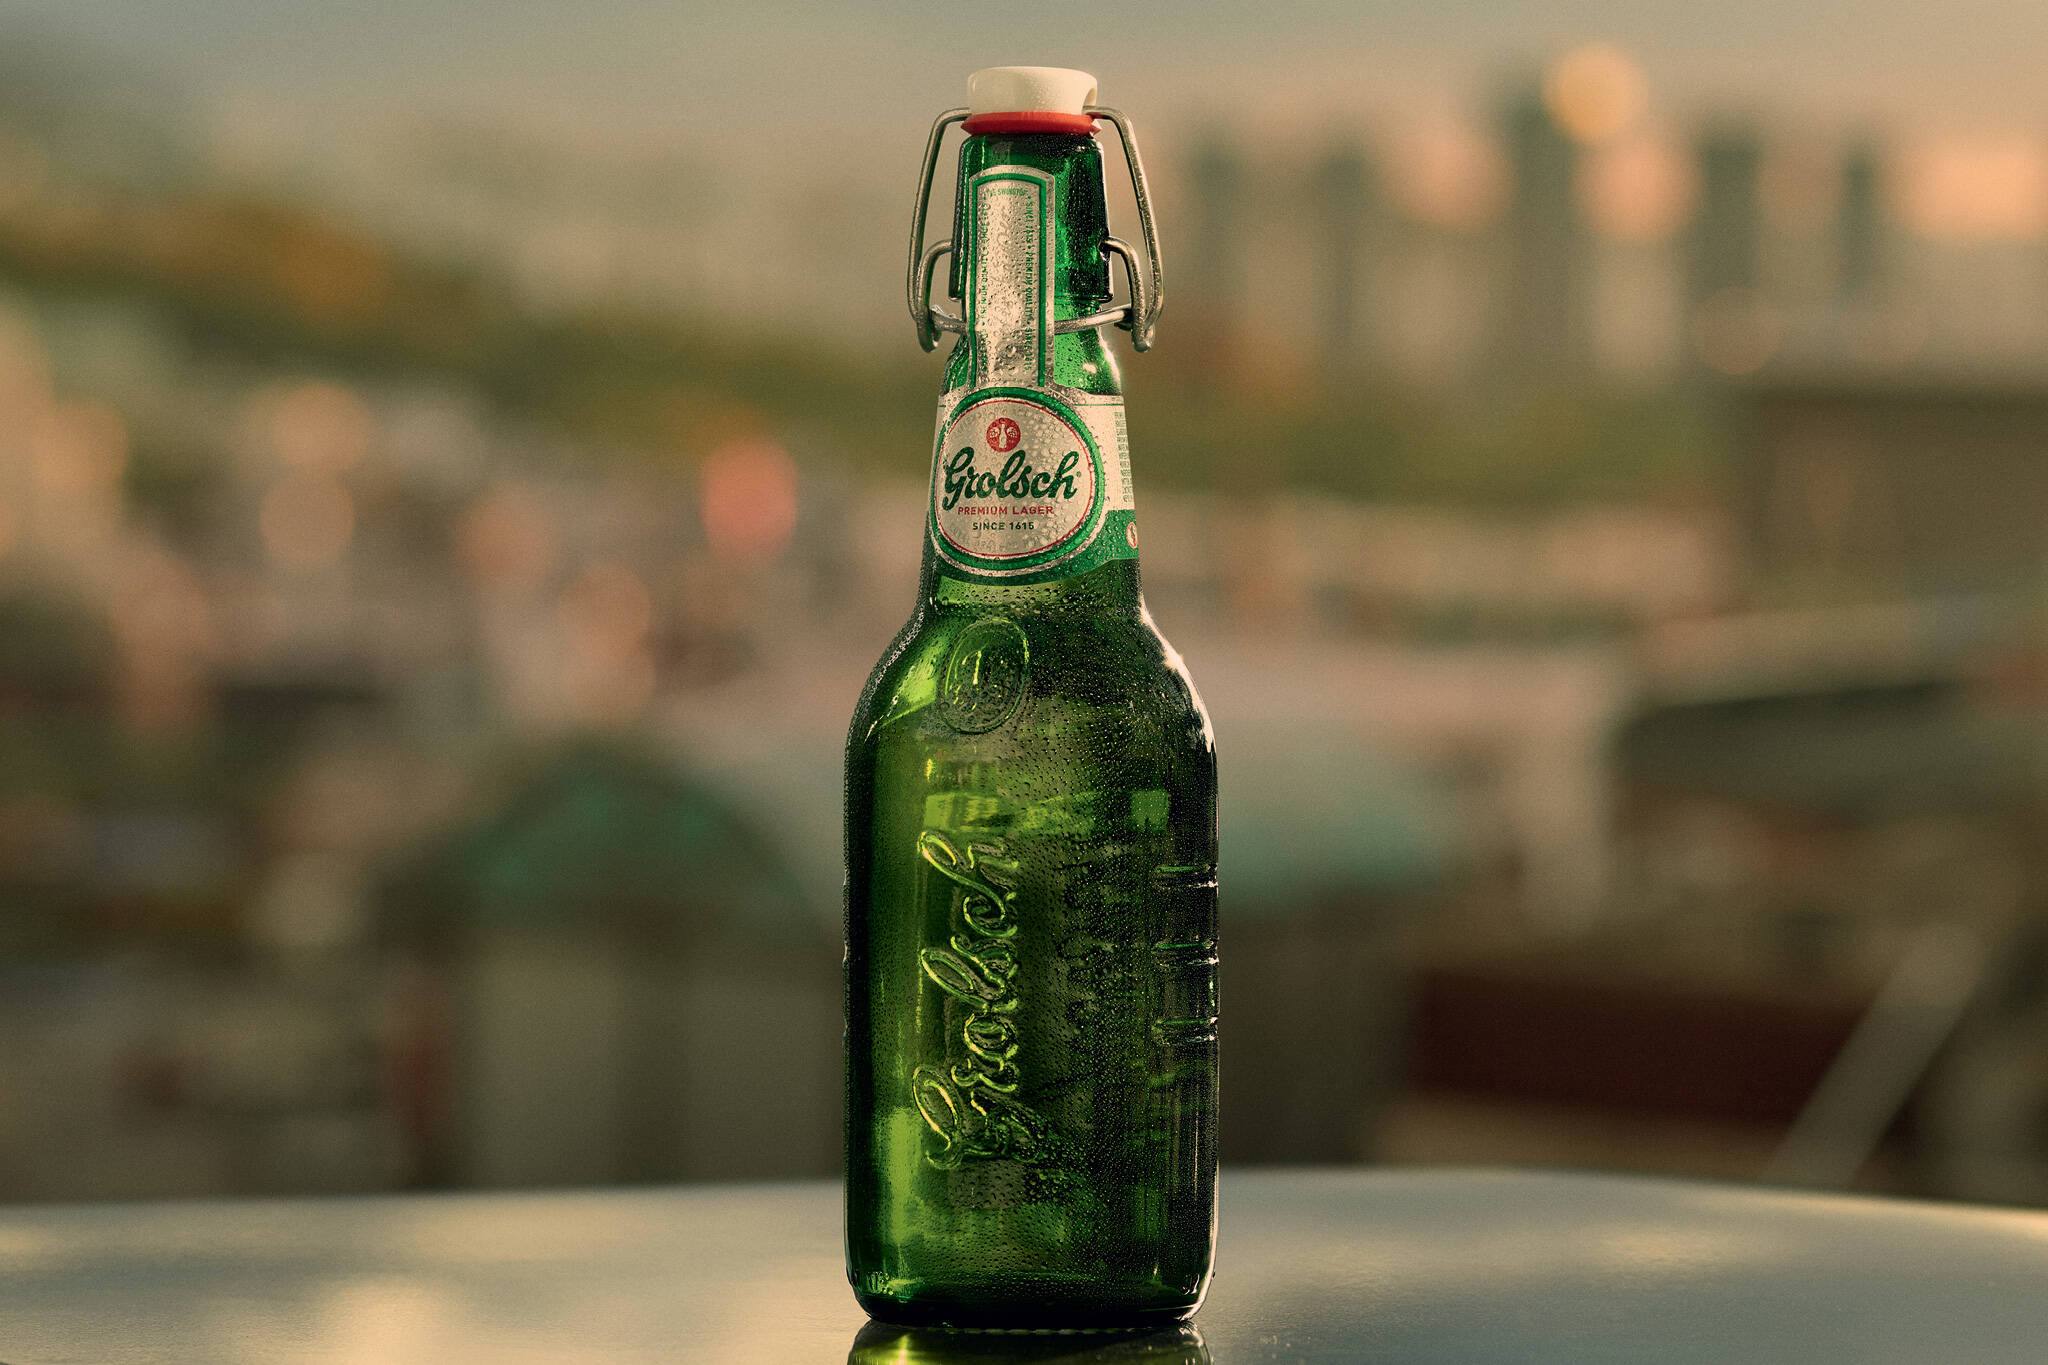 Win a music-themed prize pack from Grolsch